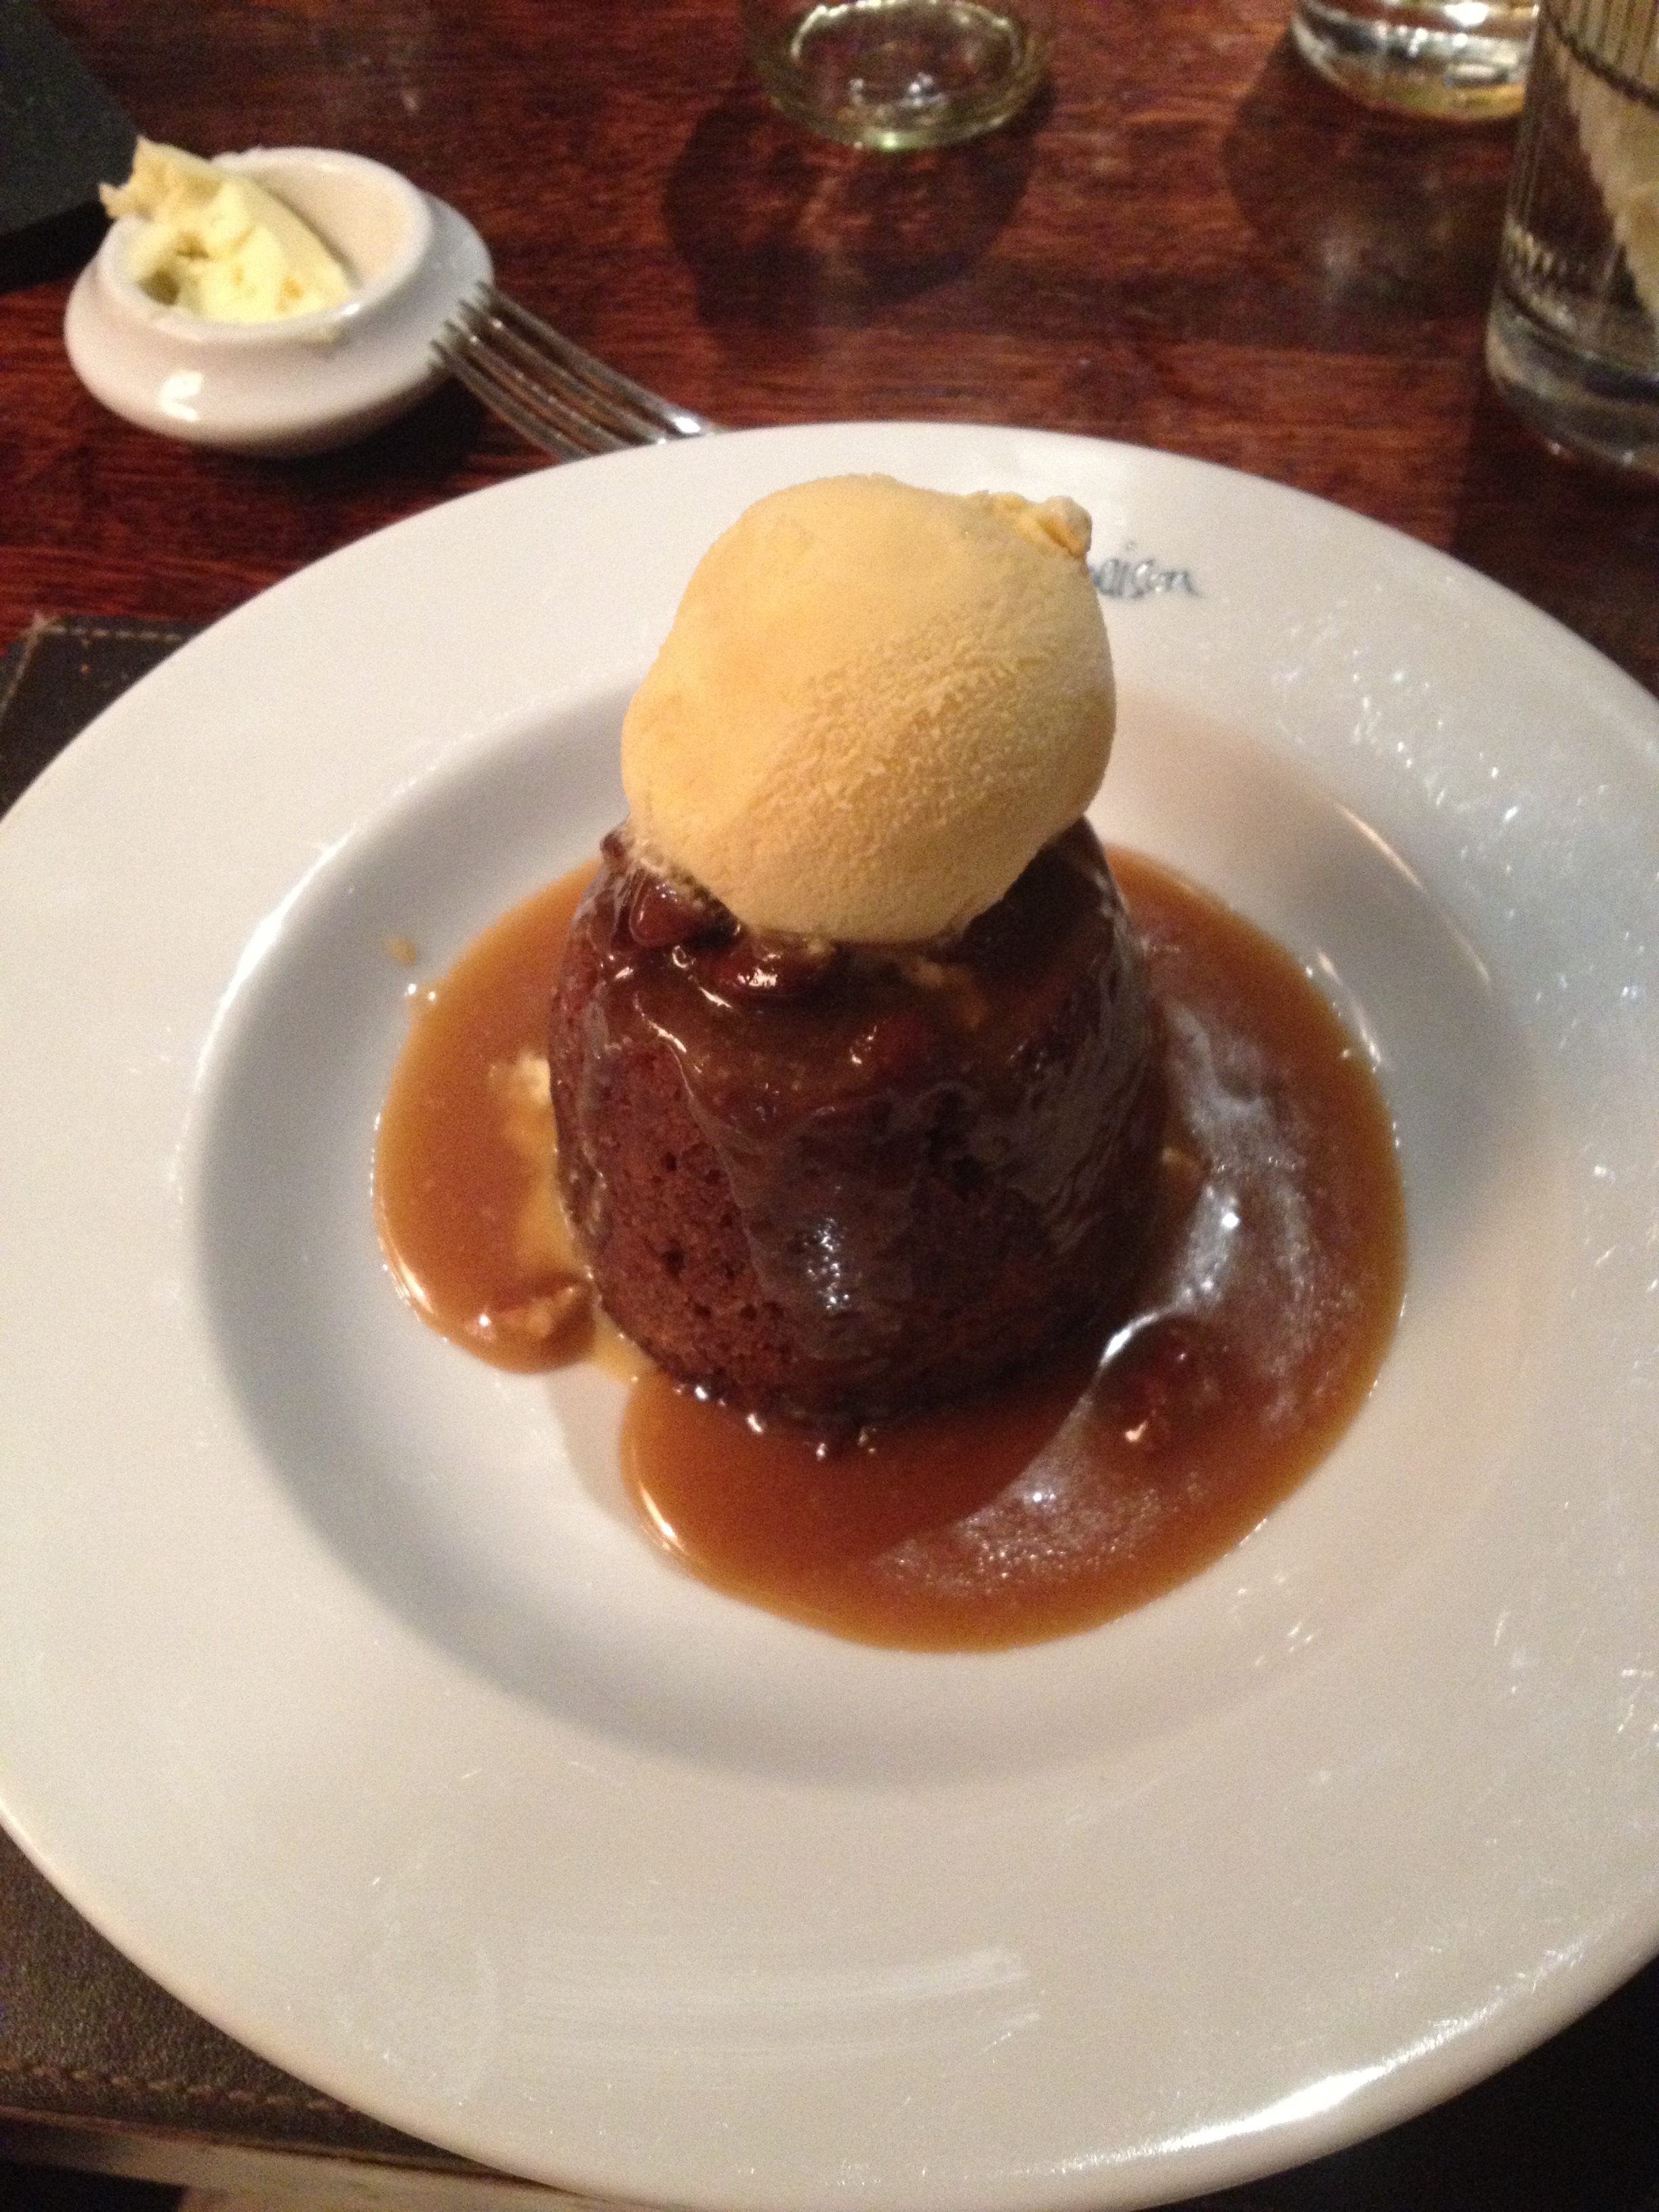 Sticky toffee pudding at Malmaison Restaurant, Leeds